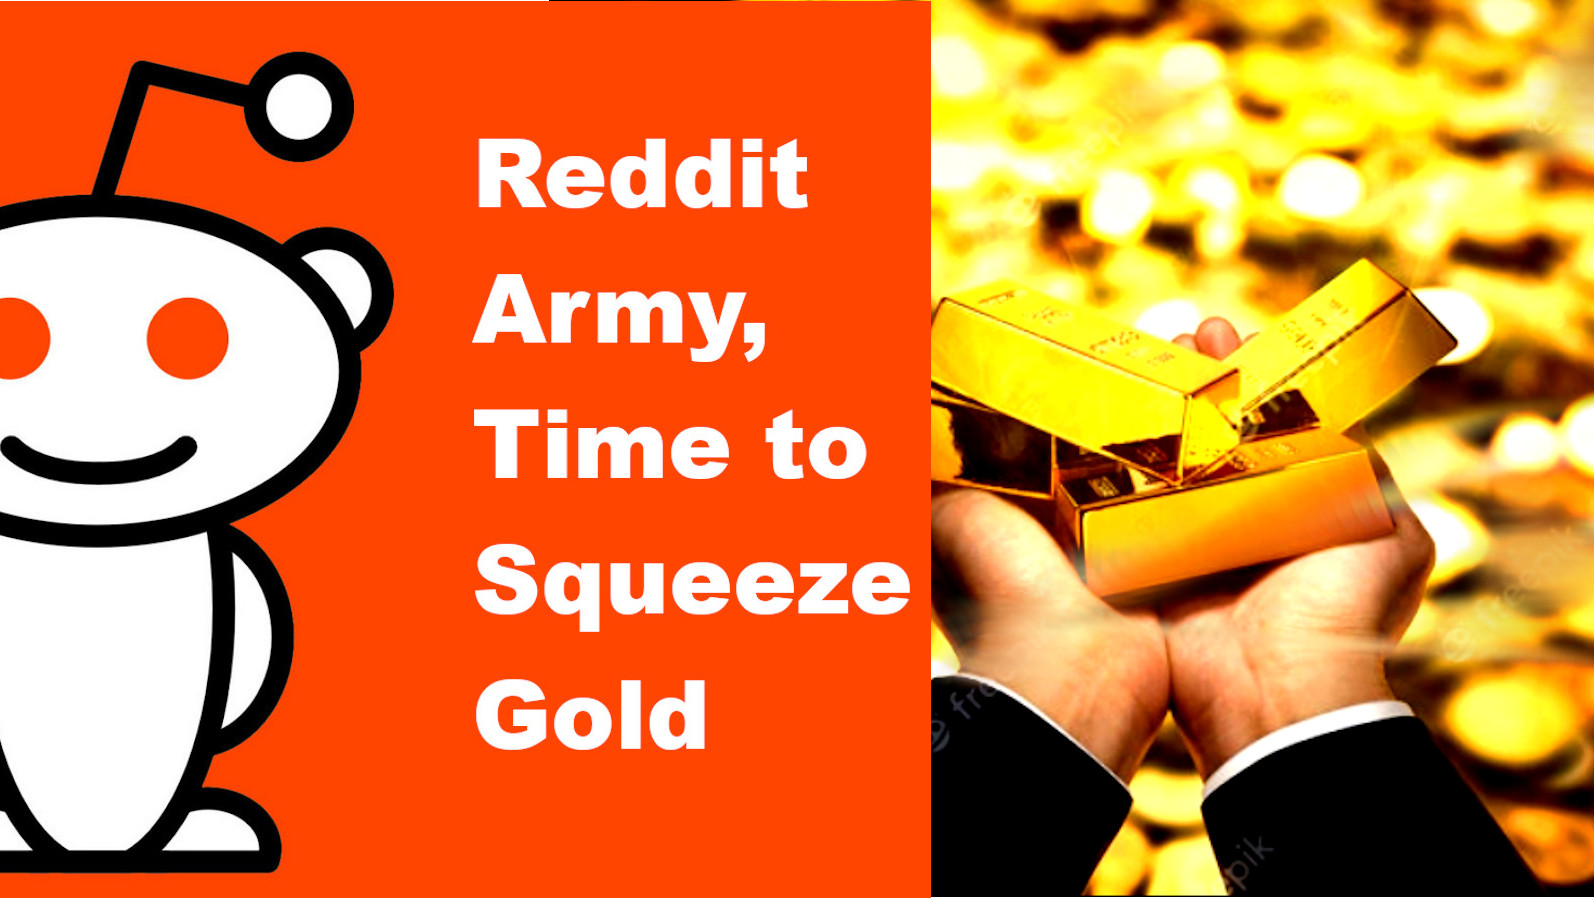 Redditors and Reddit Army, the time is perfect for a gold price squeeze